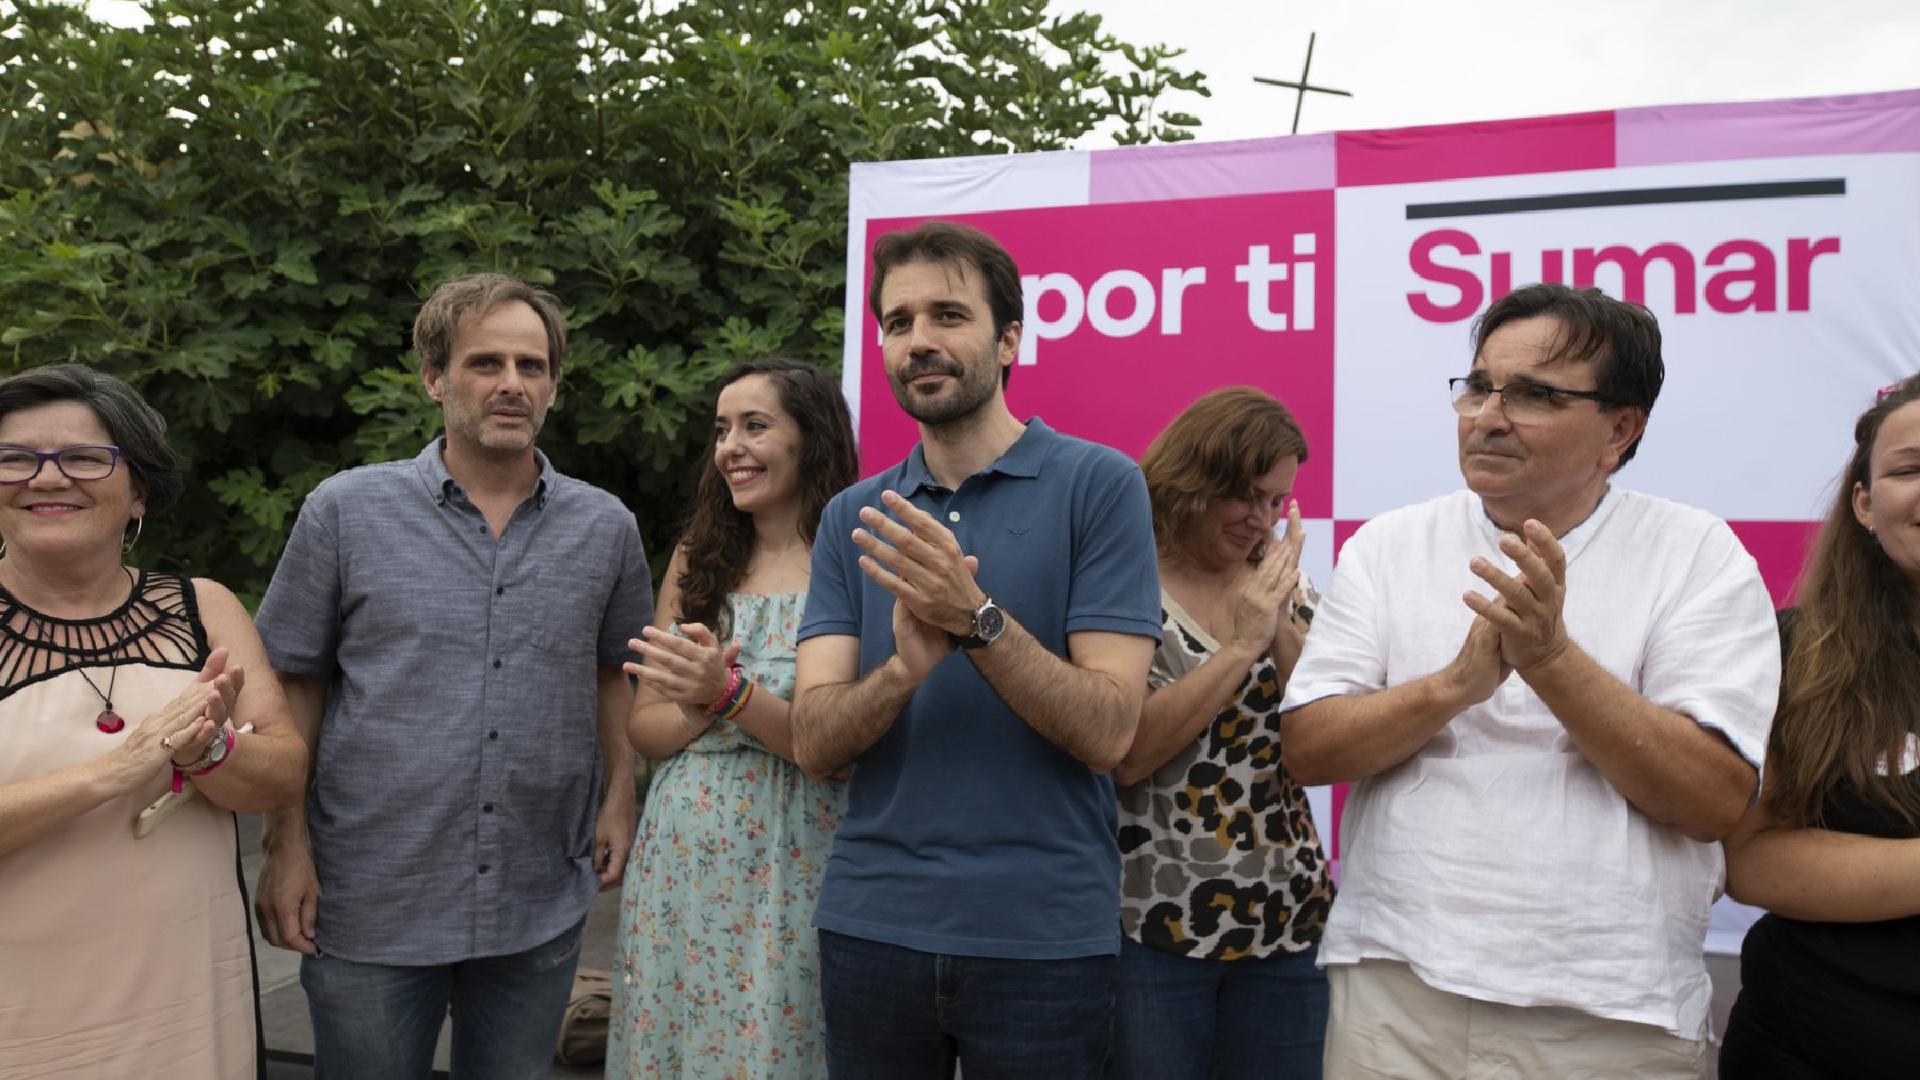 Javier Sánchez Serna defends that only with a strong Sumar will there be a majority of the left